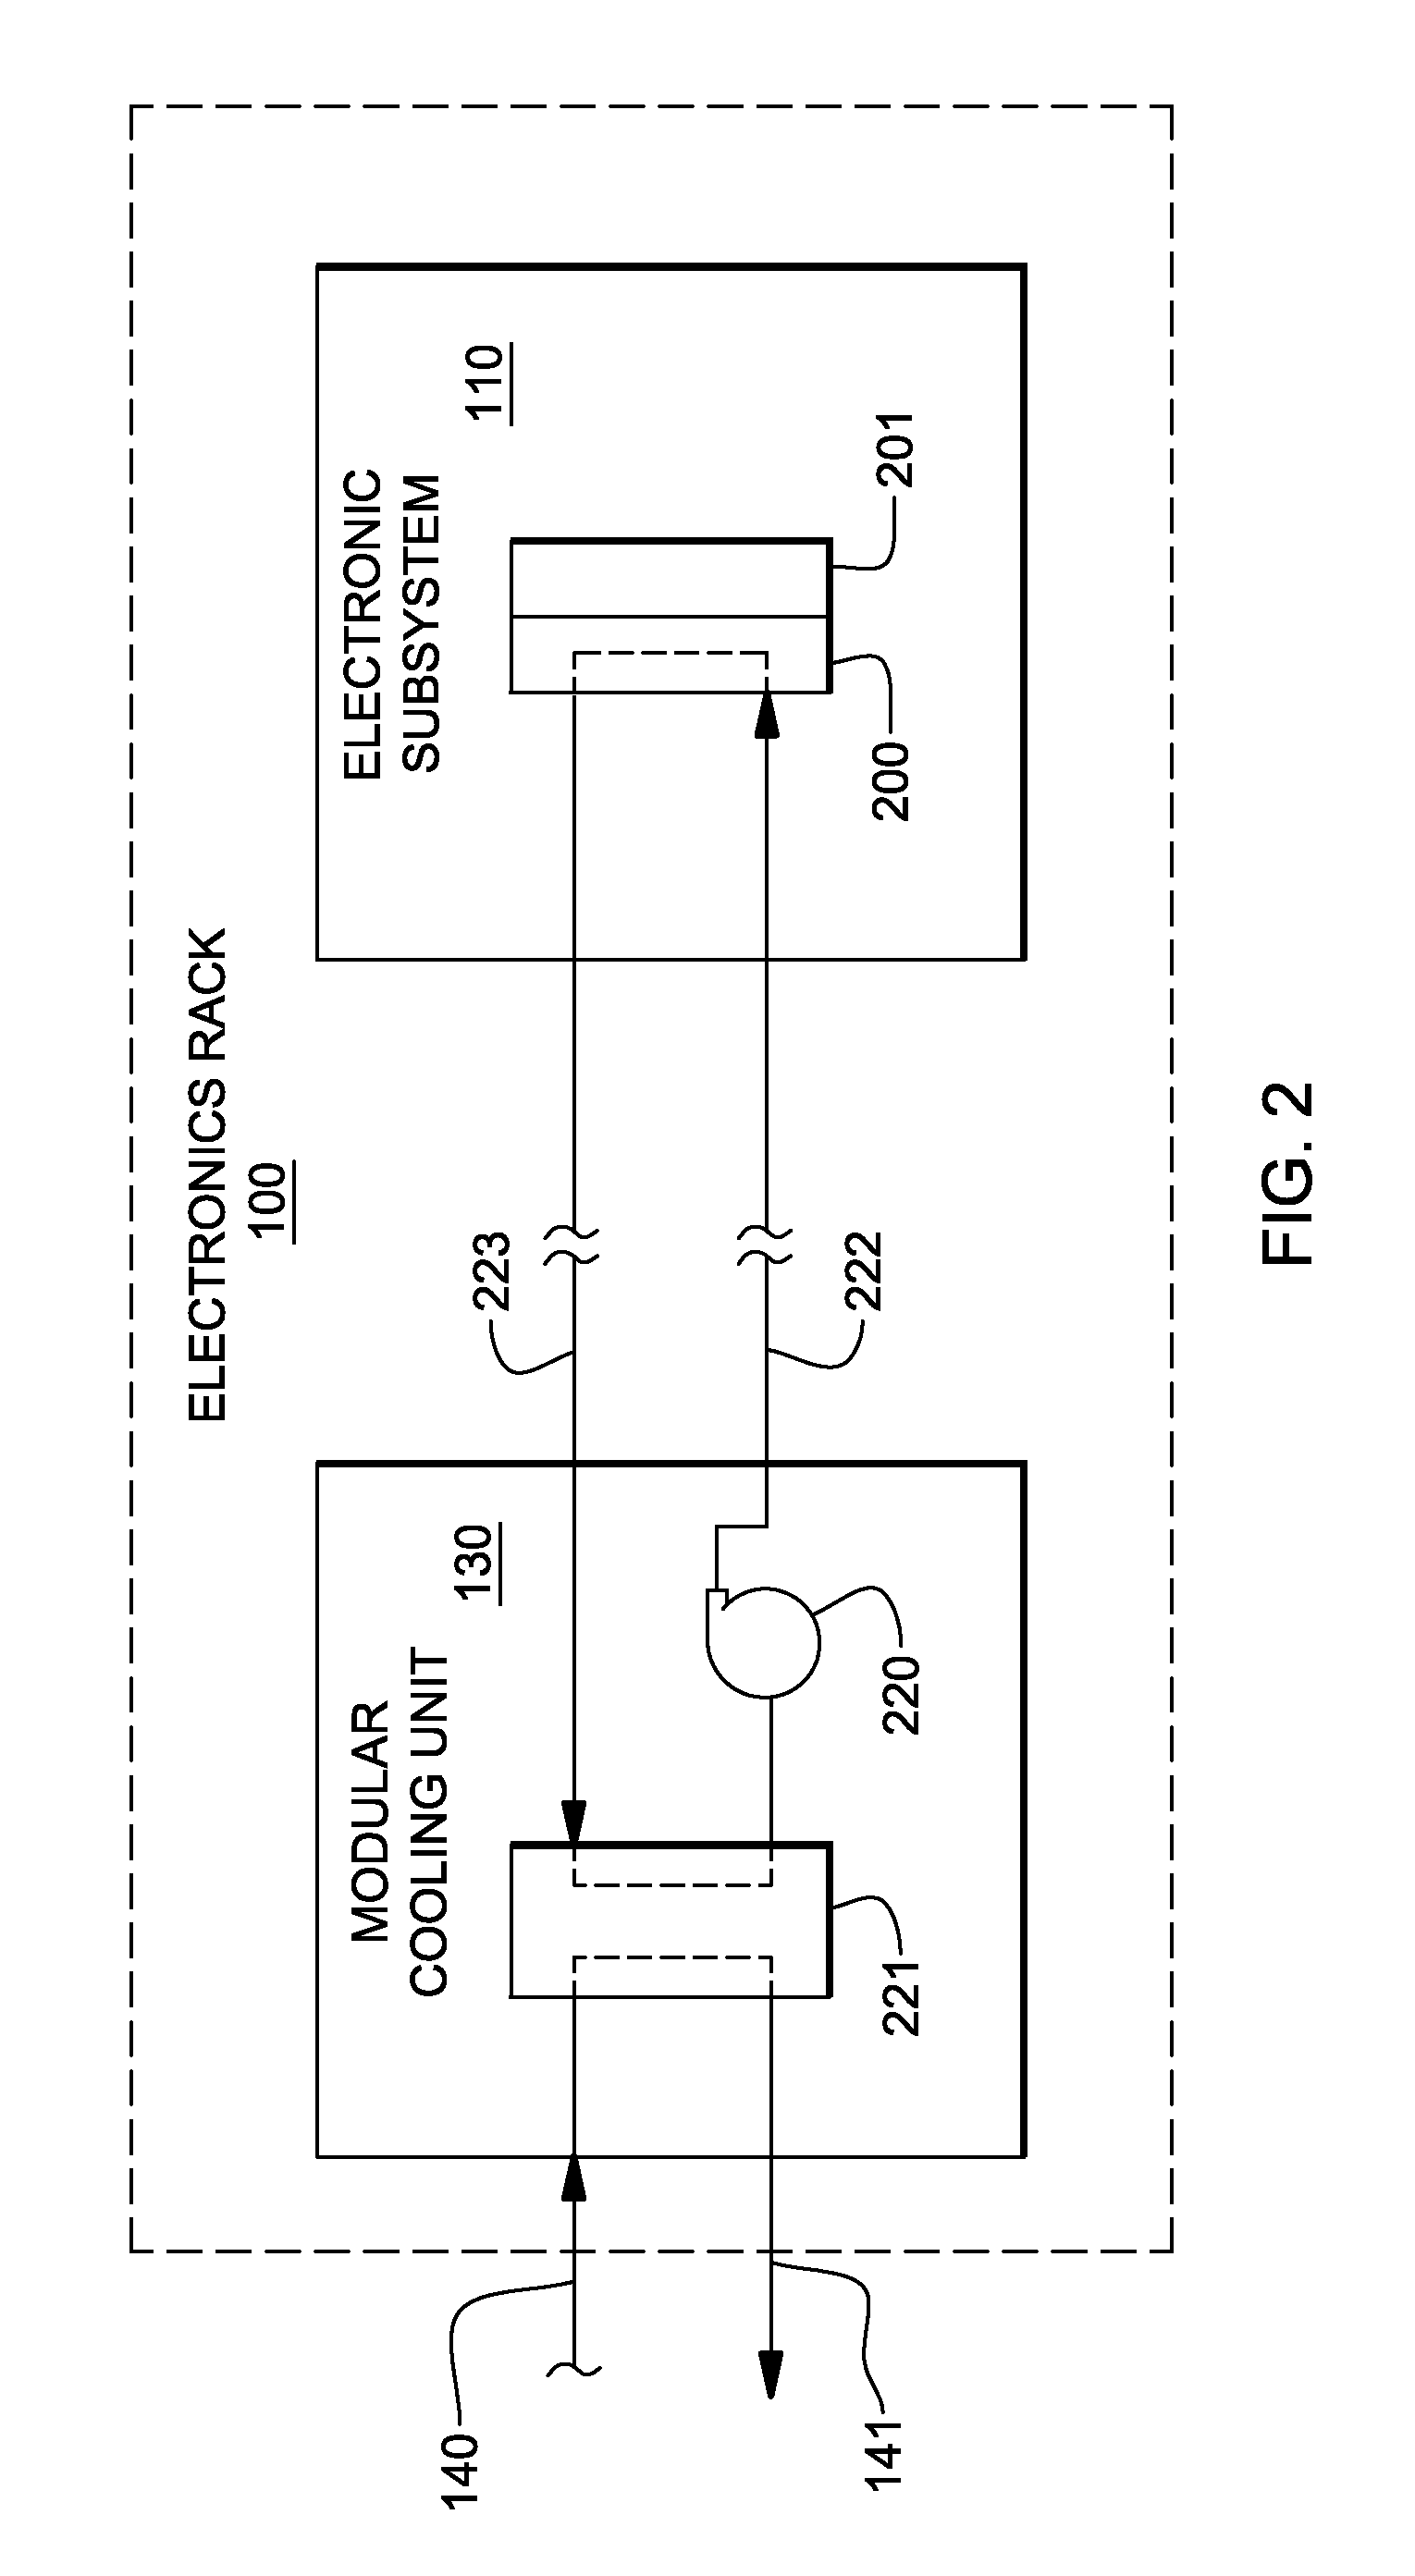 Flow boiling heat sink with vapor venting and condensing